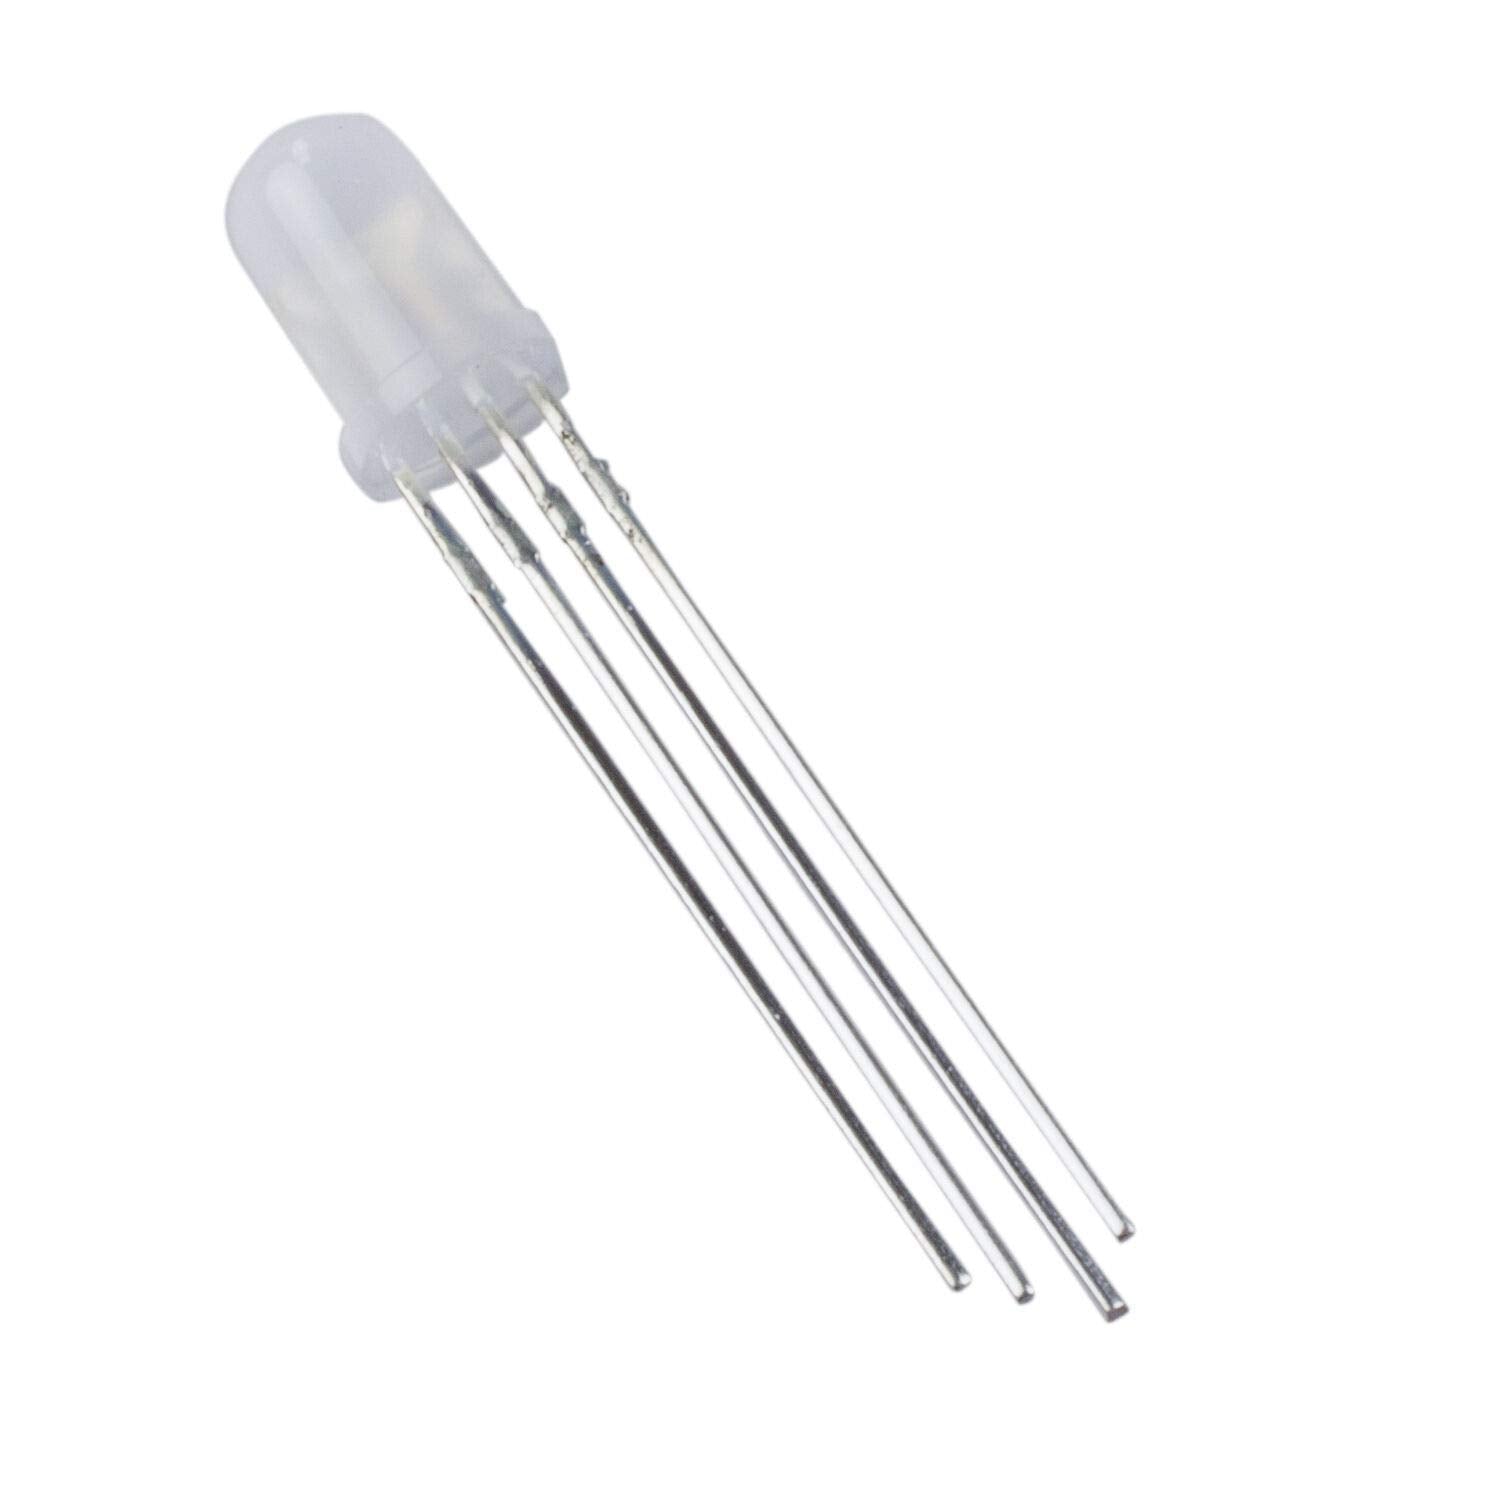 5mm Round Head Common Anode RGB Light LED Emitting Diodes